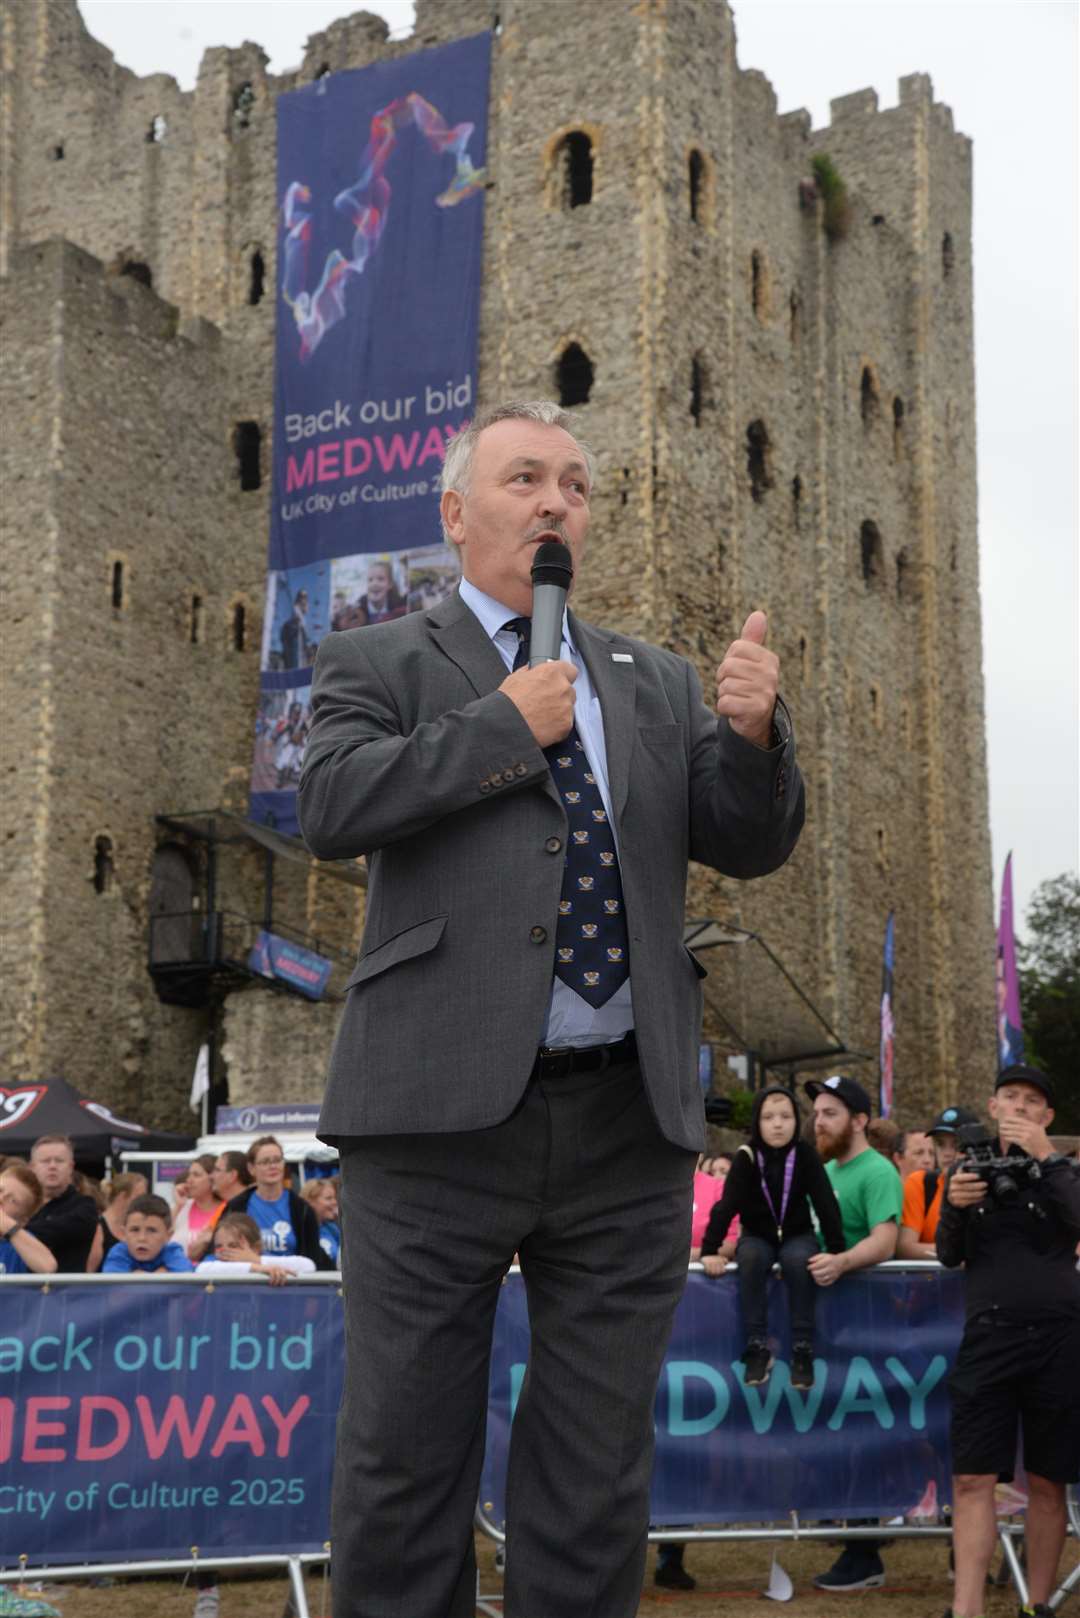 Council leader Cllr Alan Jarrett announces Medway's bid to be the UK City of Culture at the Medway Mile event at Rochester Castle on Friday evening. Picture: Chris Davey. (14155971)